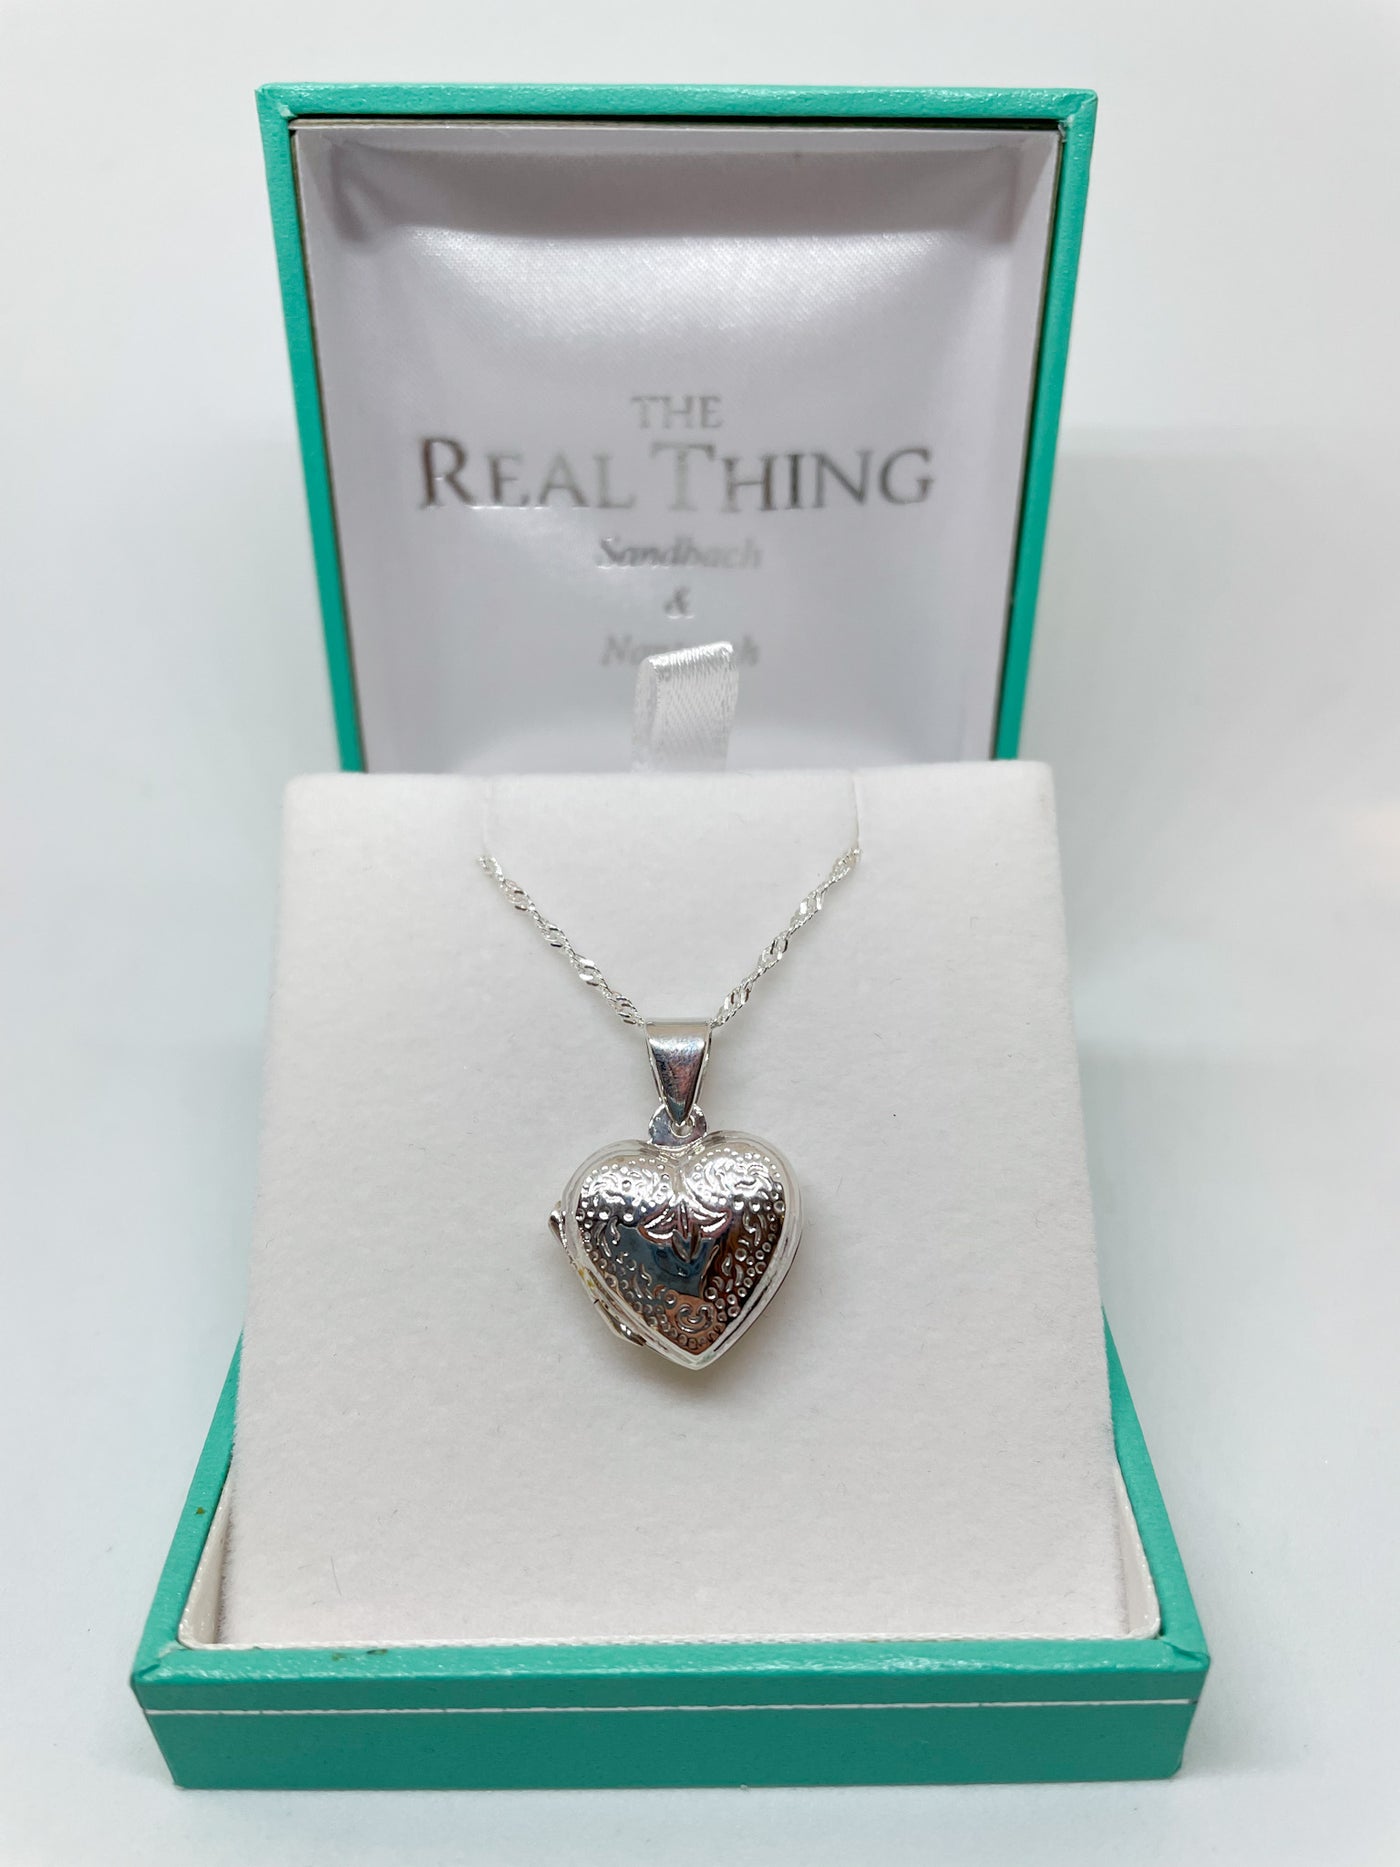 Engraved Heart Locket Necklace